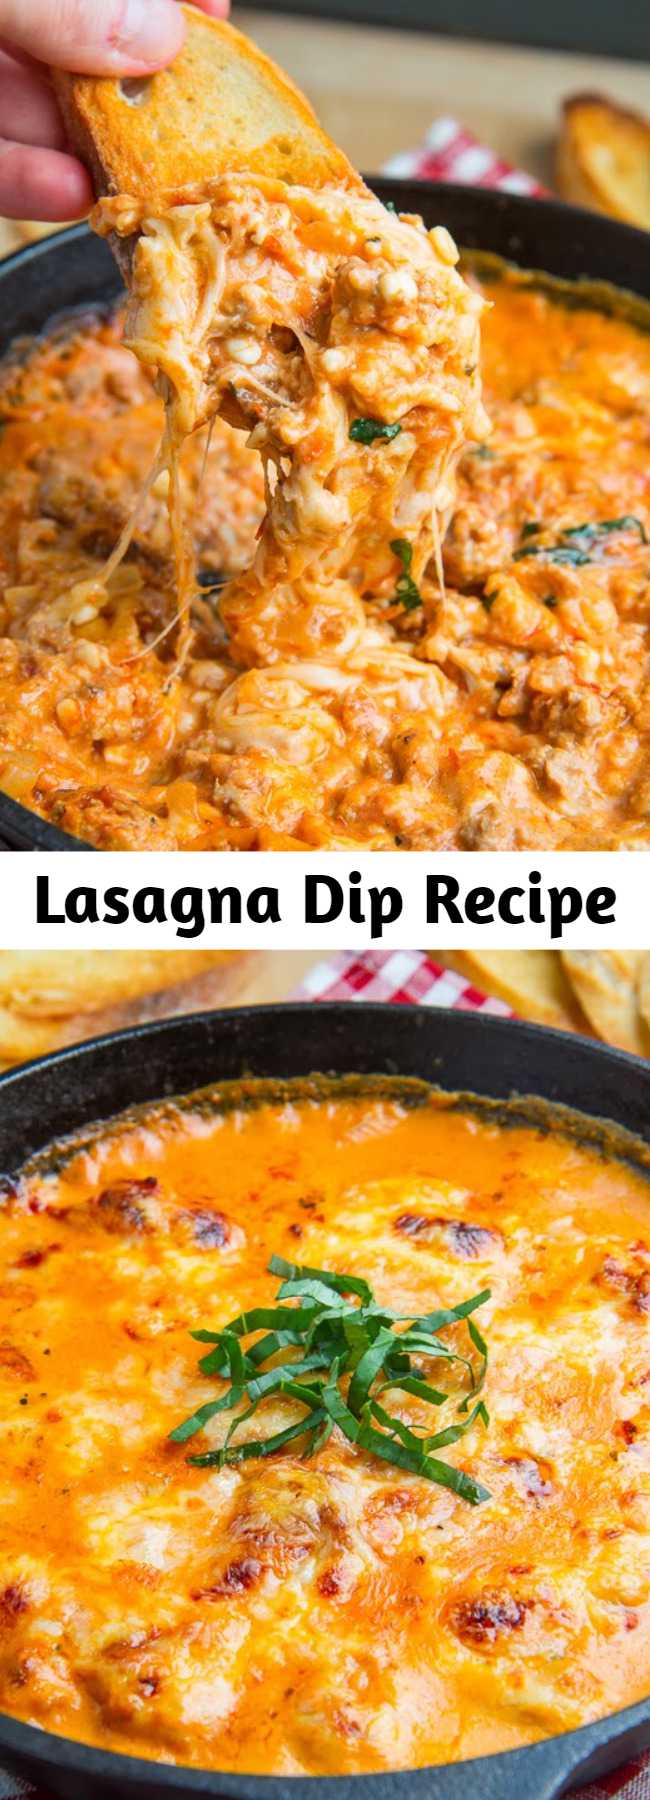 All of the flavours of lasagna in a hot cheesy dip with no regrets!